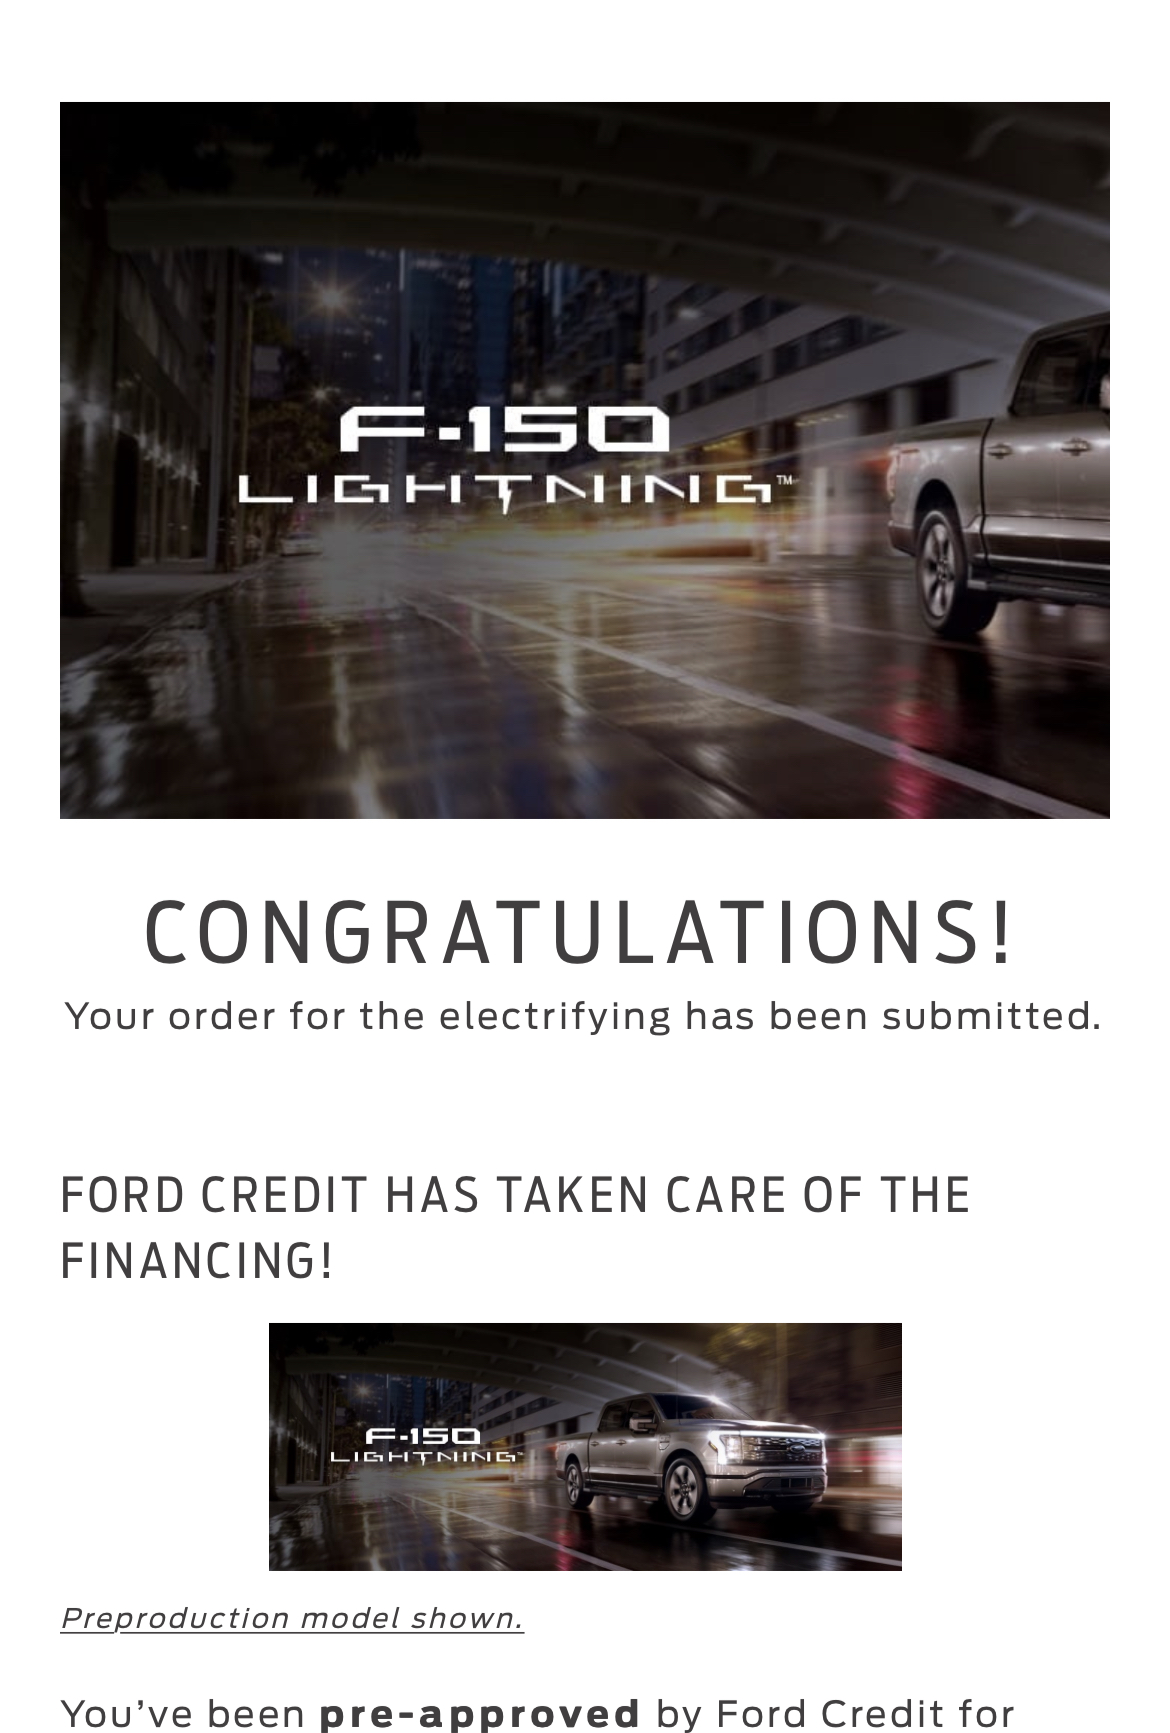 Ford F-150 Lightning Got a Ford Email!  But it just "preapproves me" for financing to buy a vehicle that I can't even get 2015DE34-515B-4892-993D-2E4991AA4157